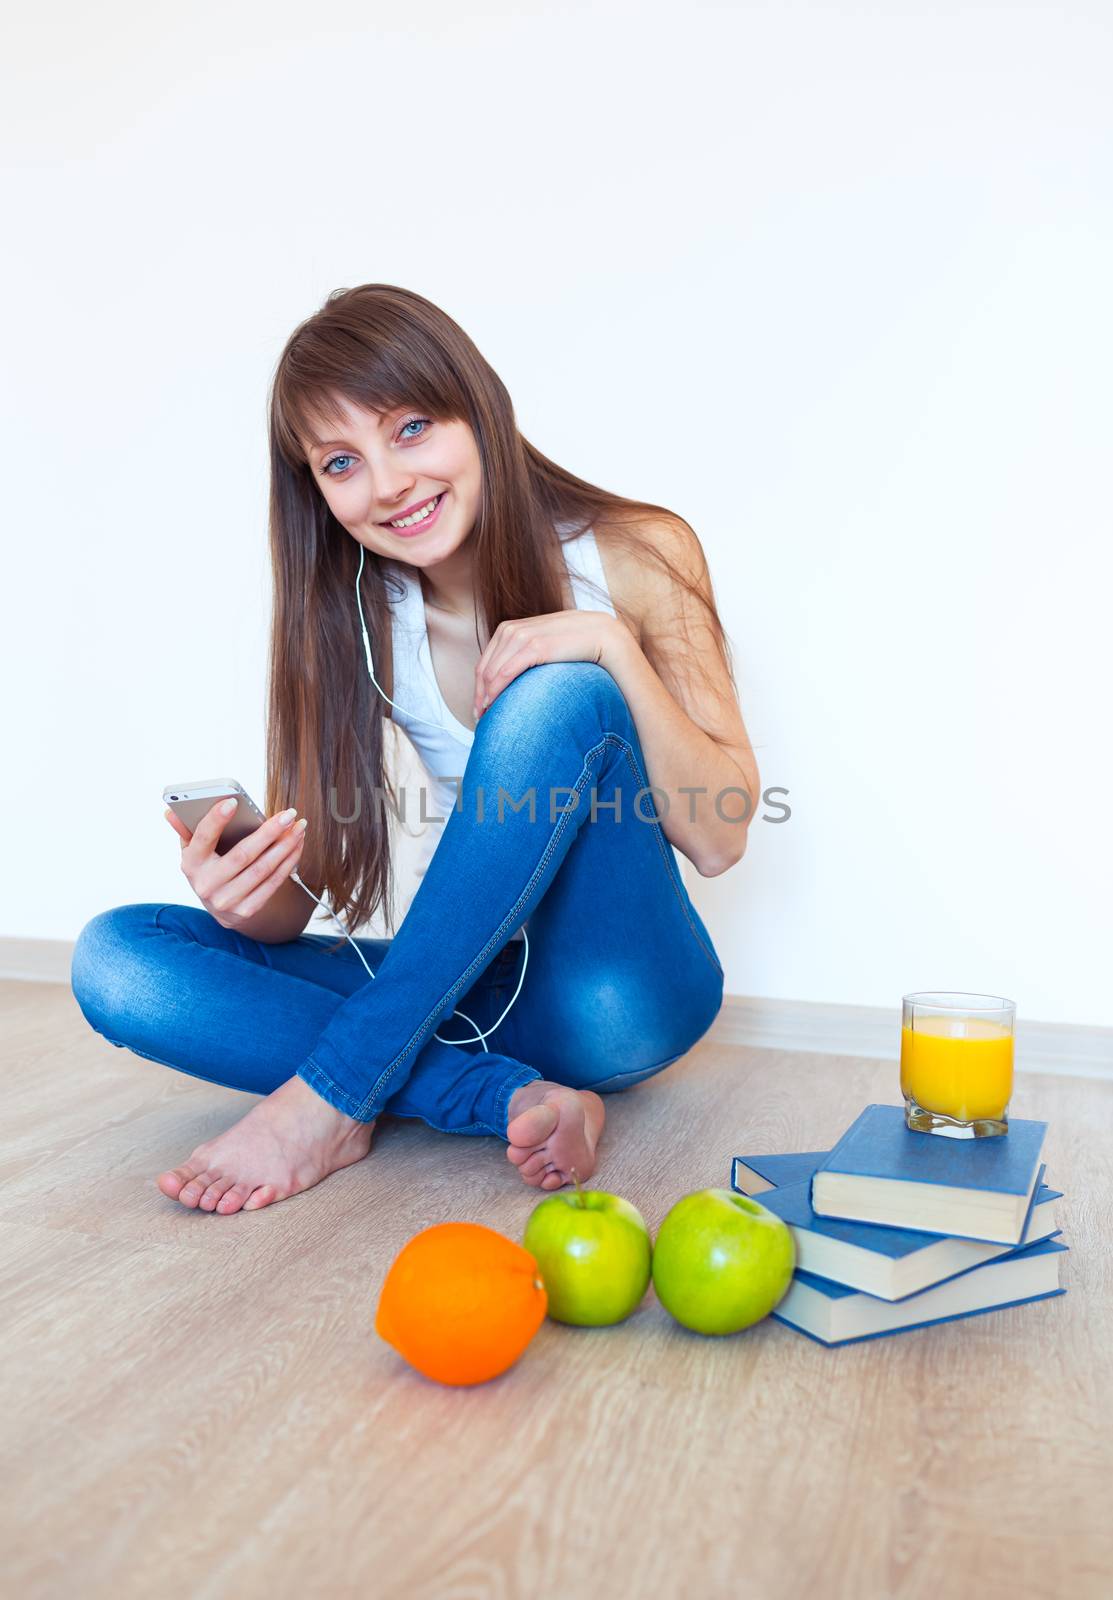 Portrait of a young woman with headphones and green apple listening music at home